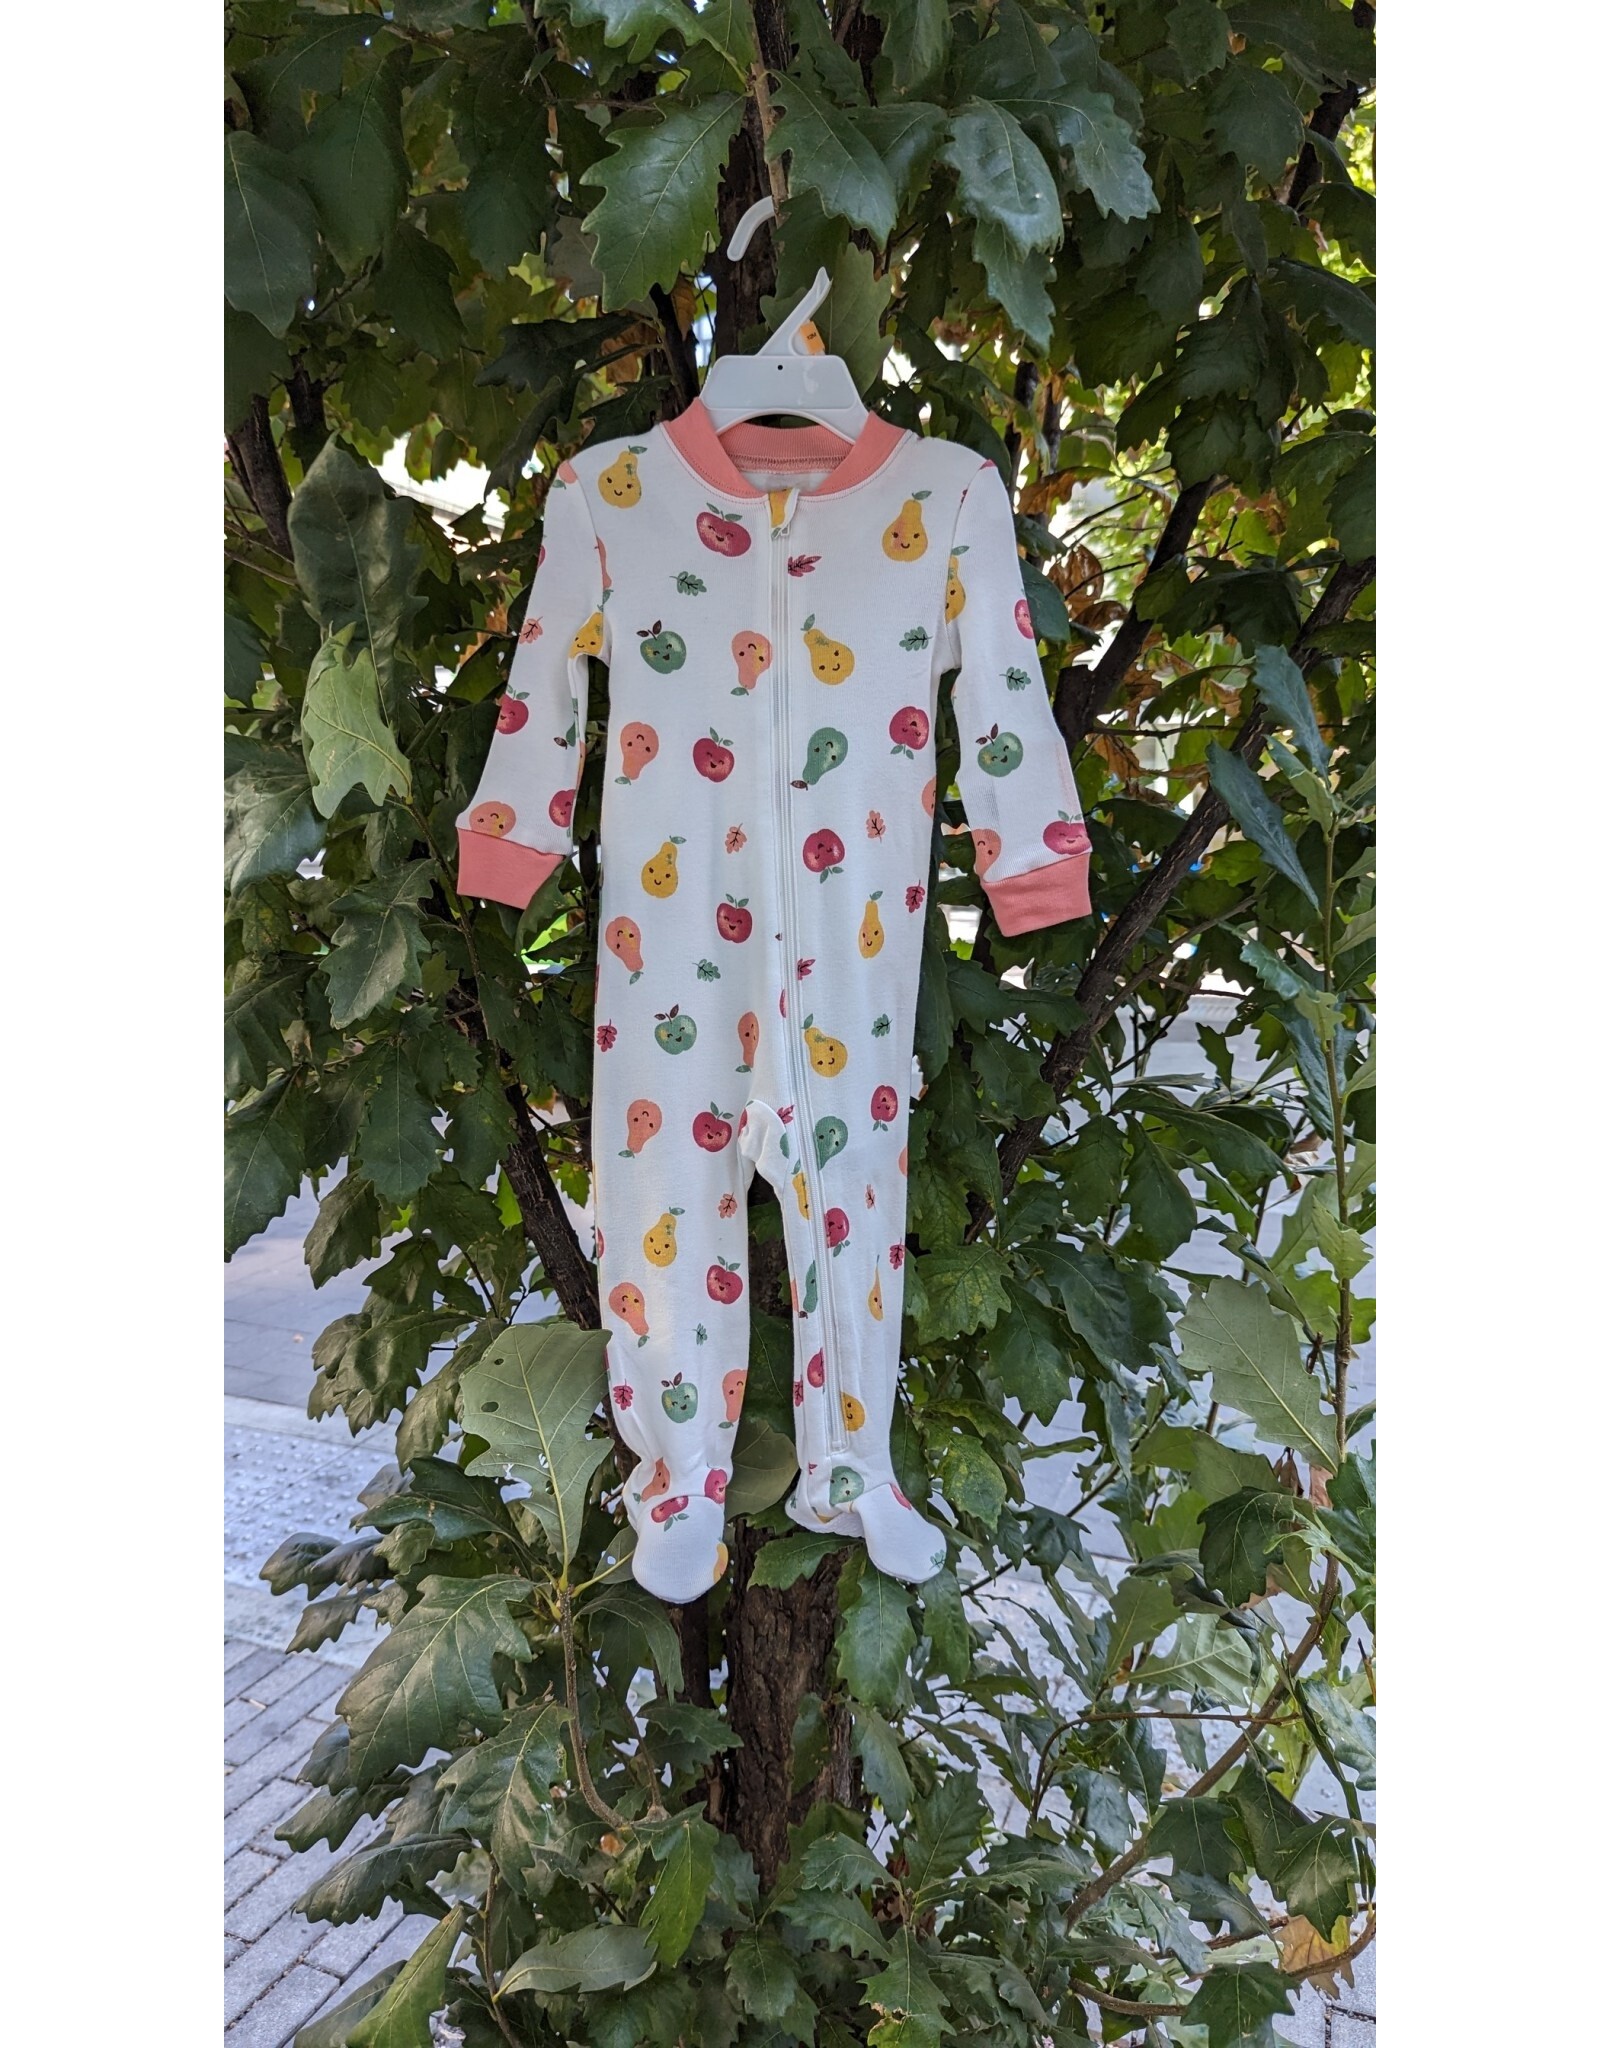 Little Me Fall Apples and Pears Cotton Sleepwear